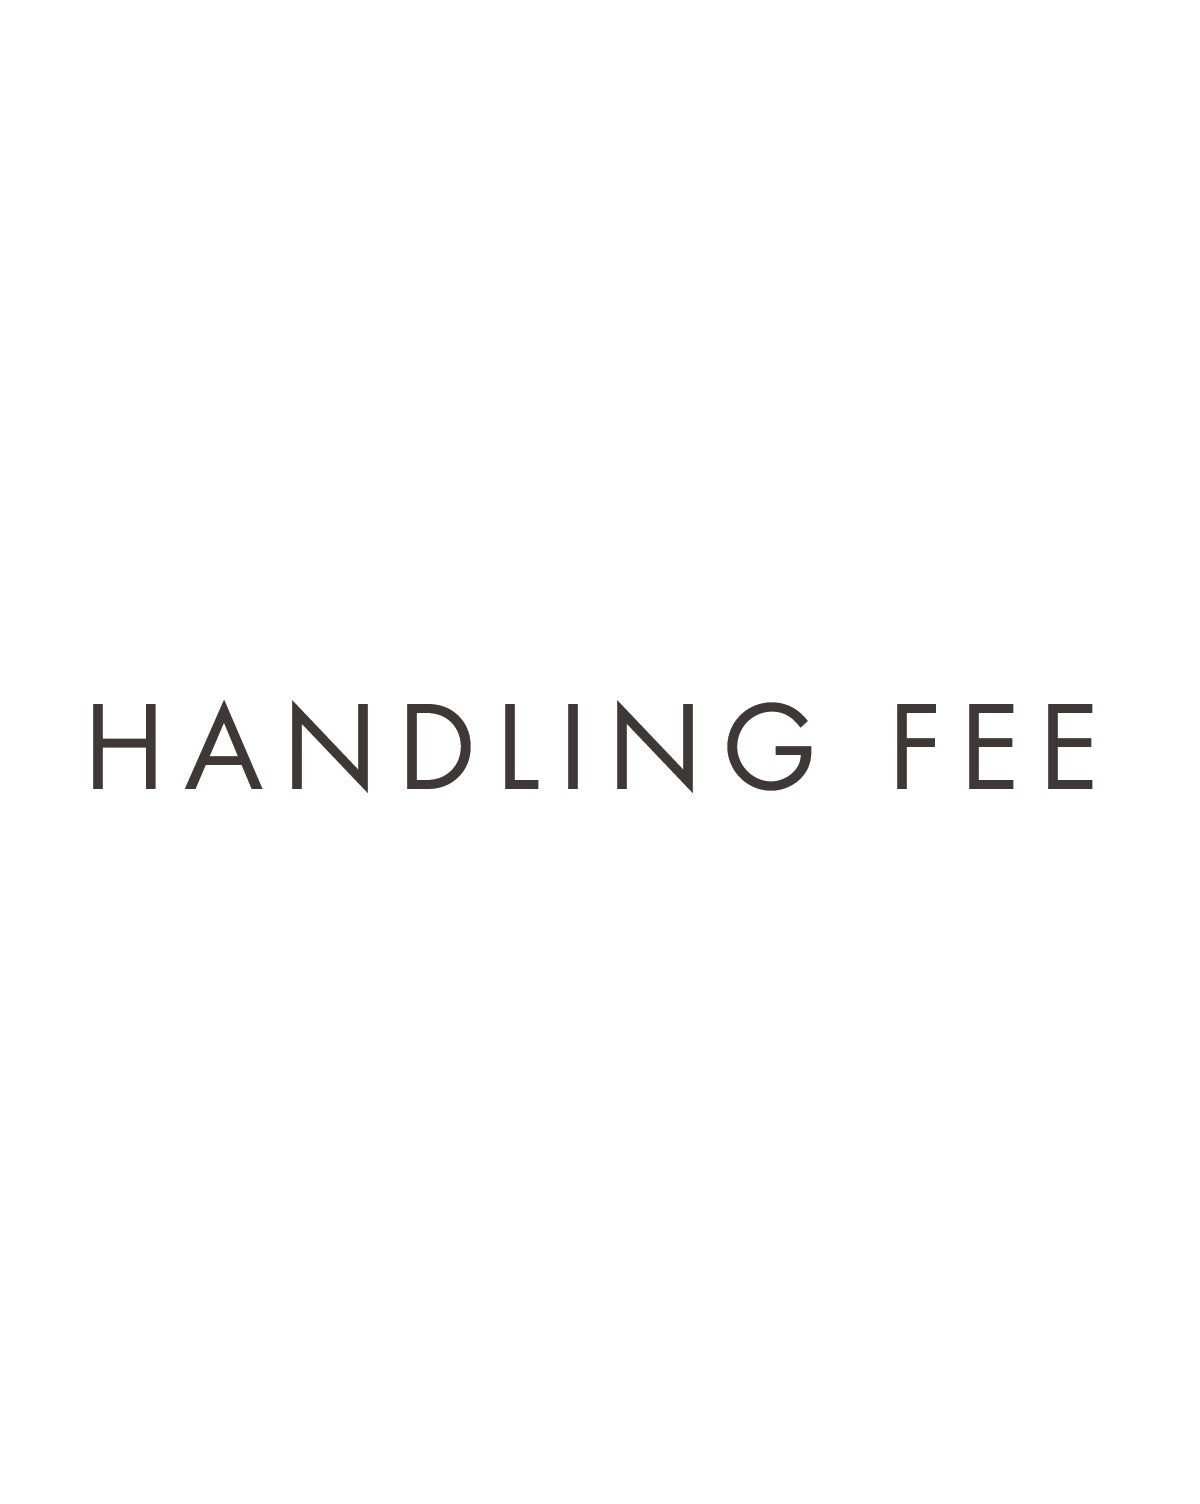 McGee & Co., Handling Fee for "Yates Chair"